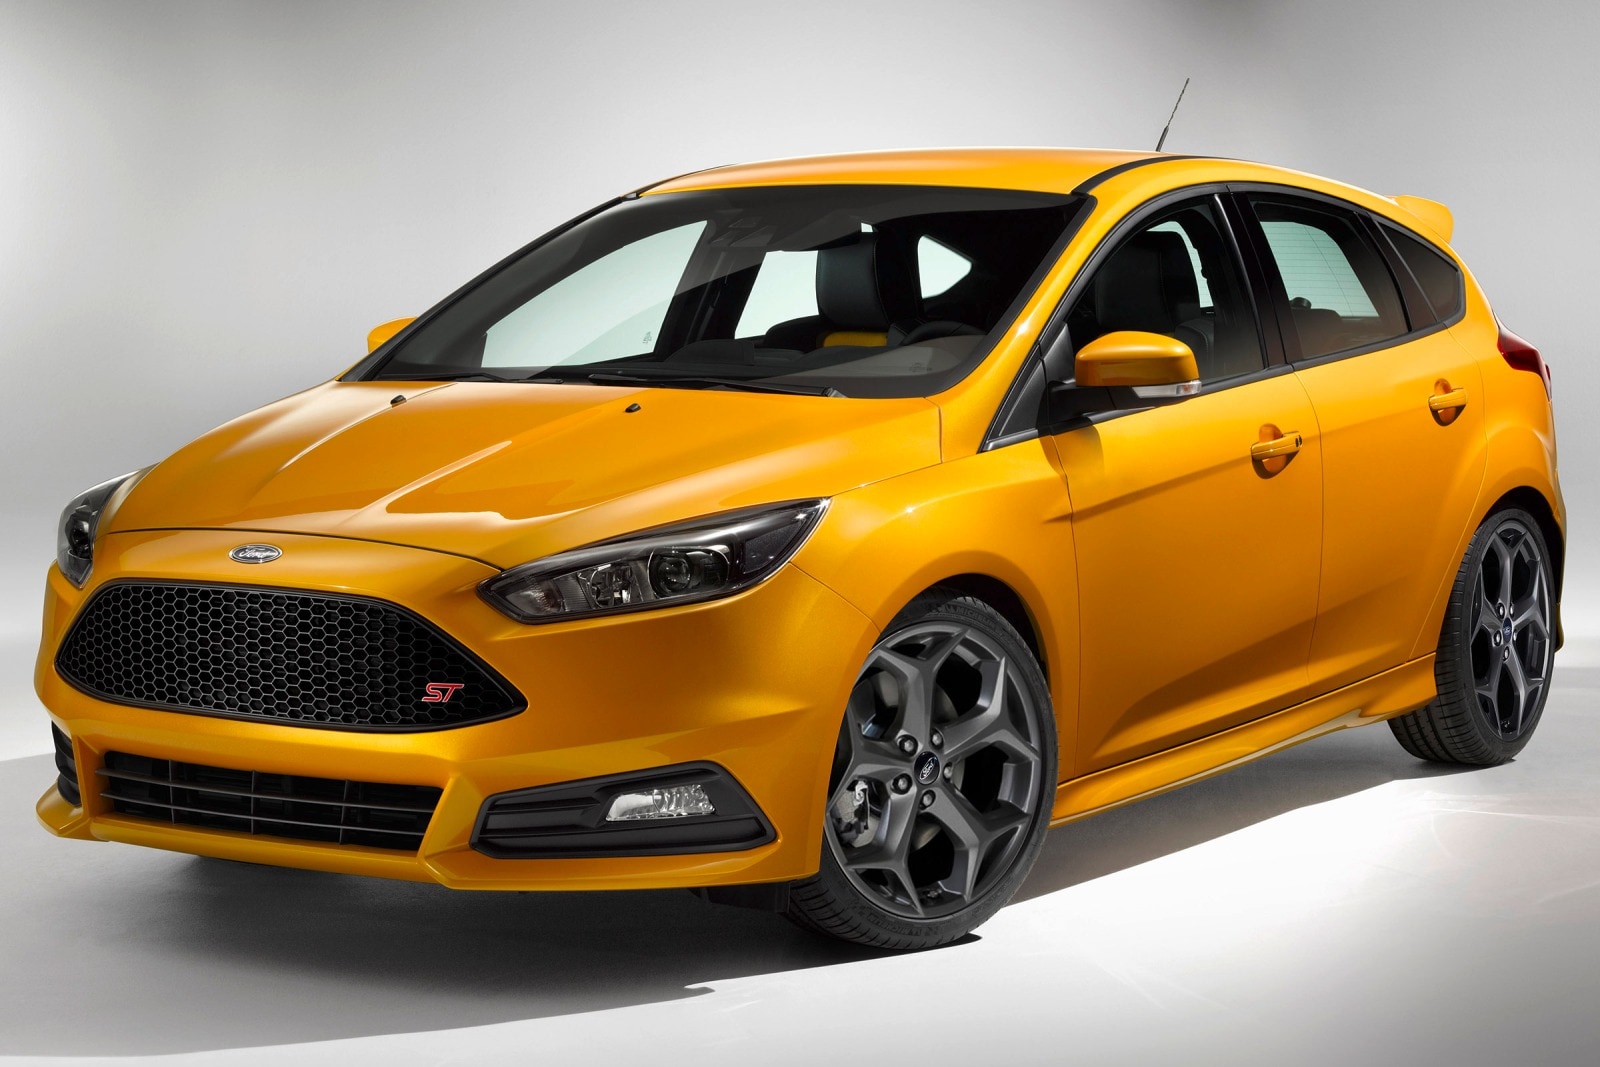 How Much Horsepower Does a Ford Focus St Have 